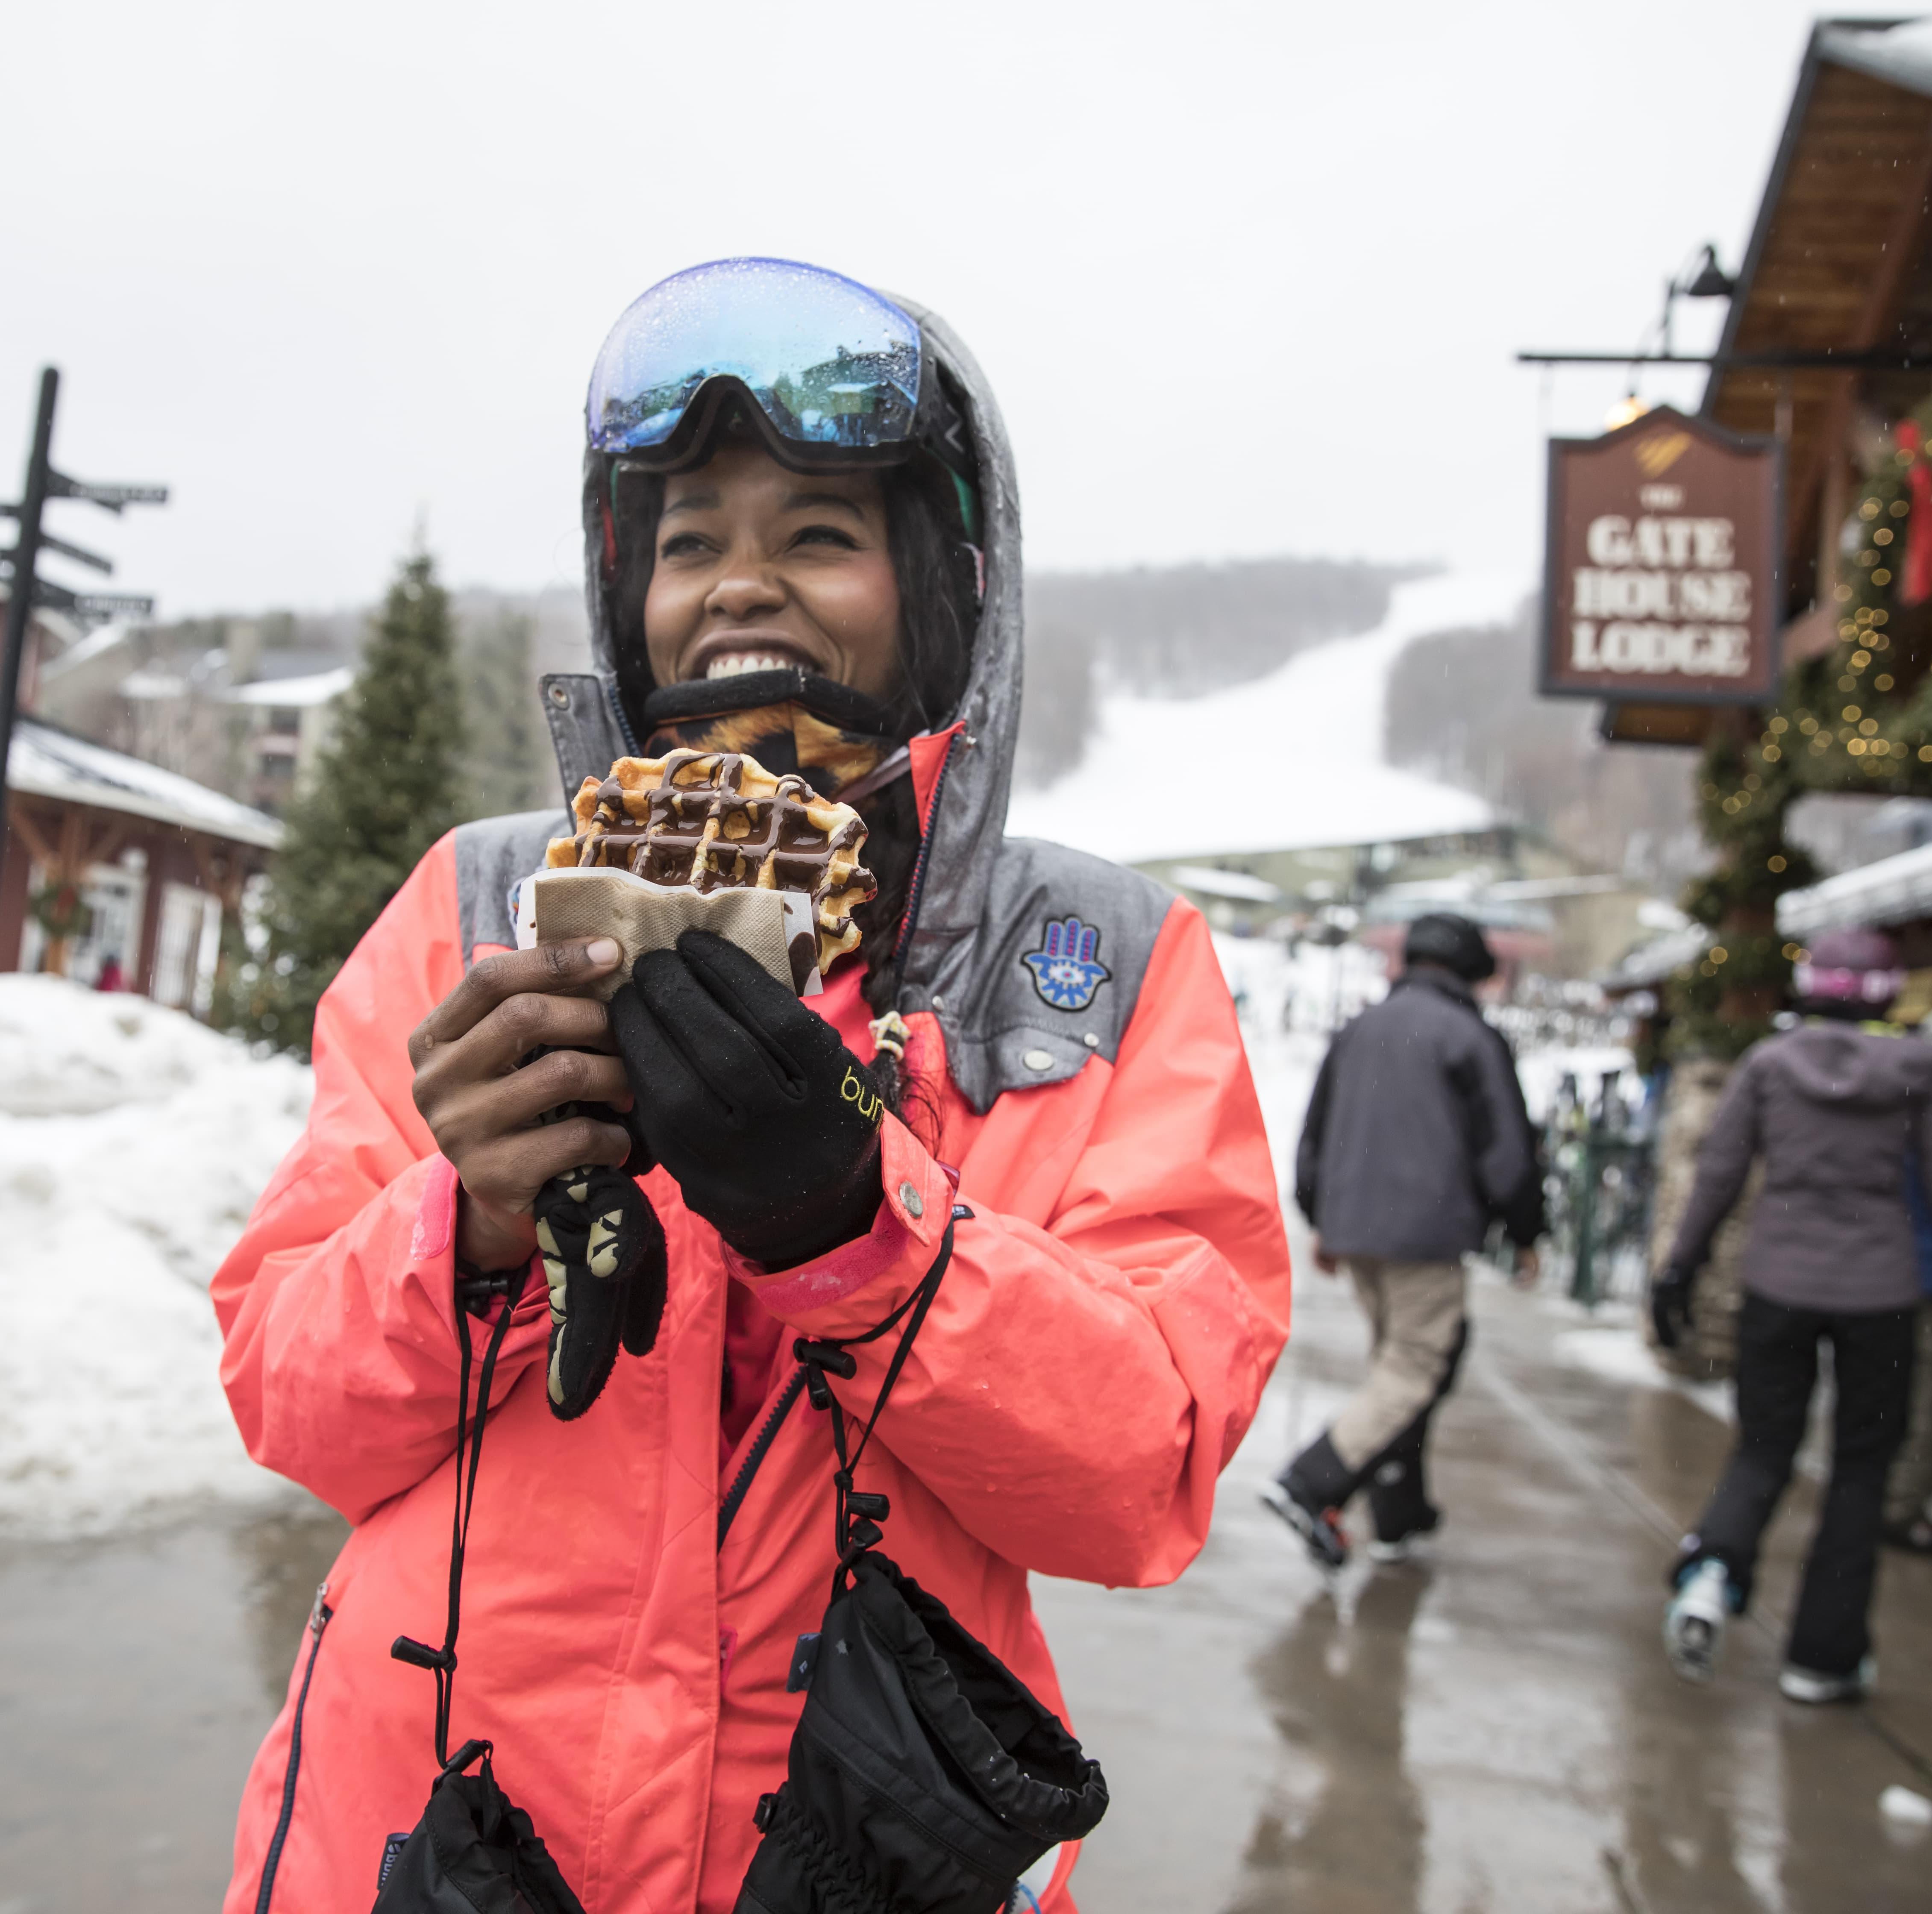 Person in ski gear holding a waffle and smiling